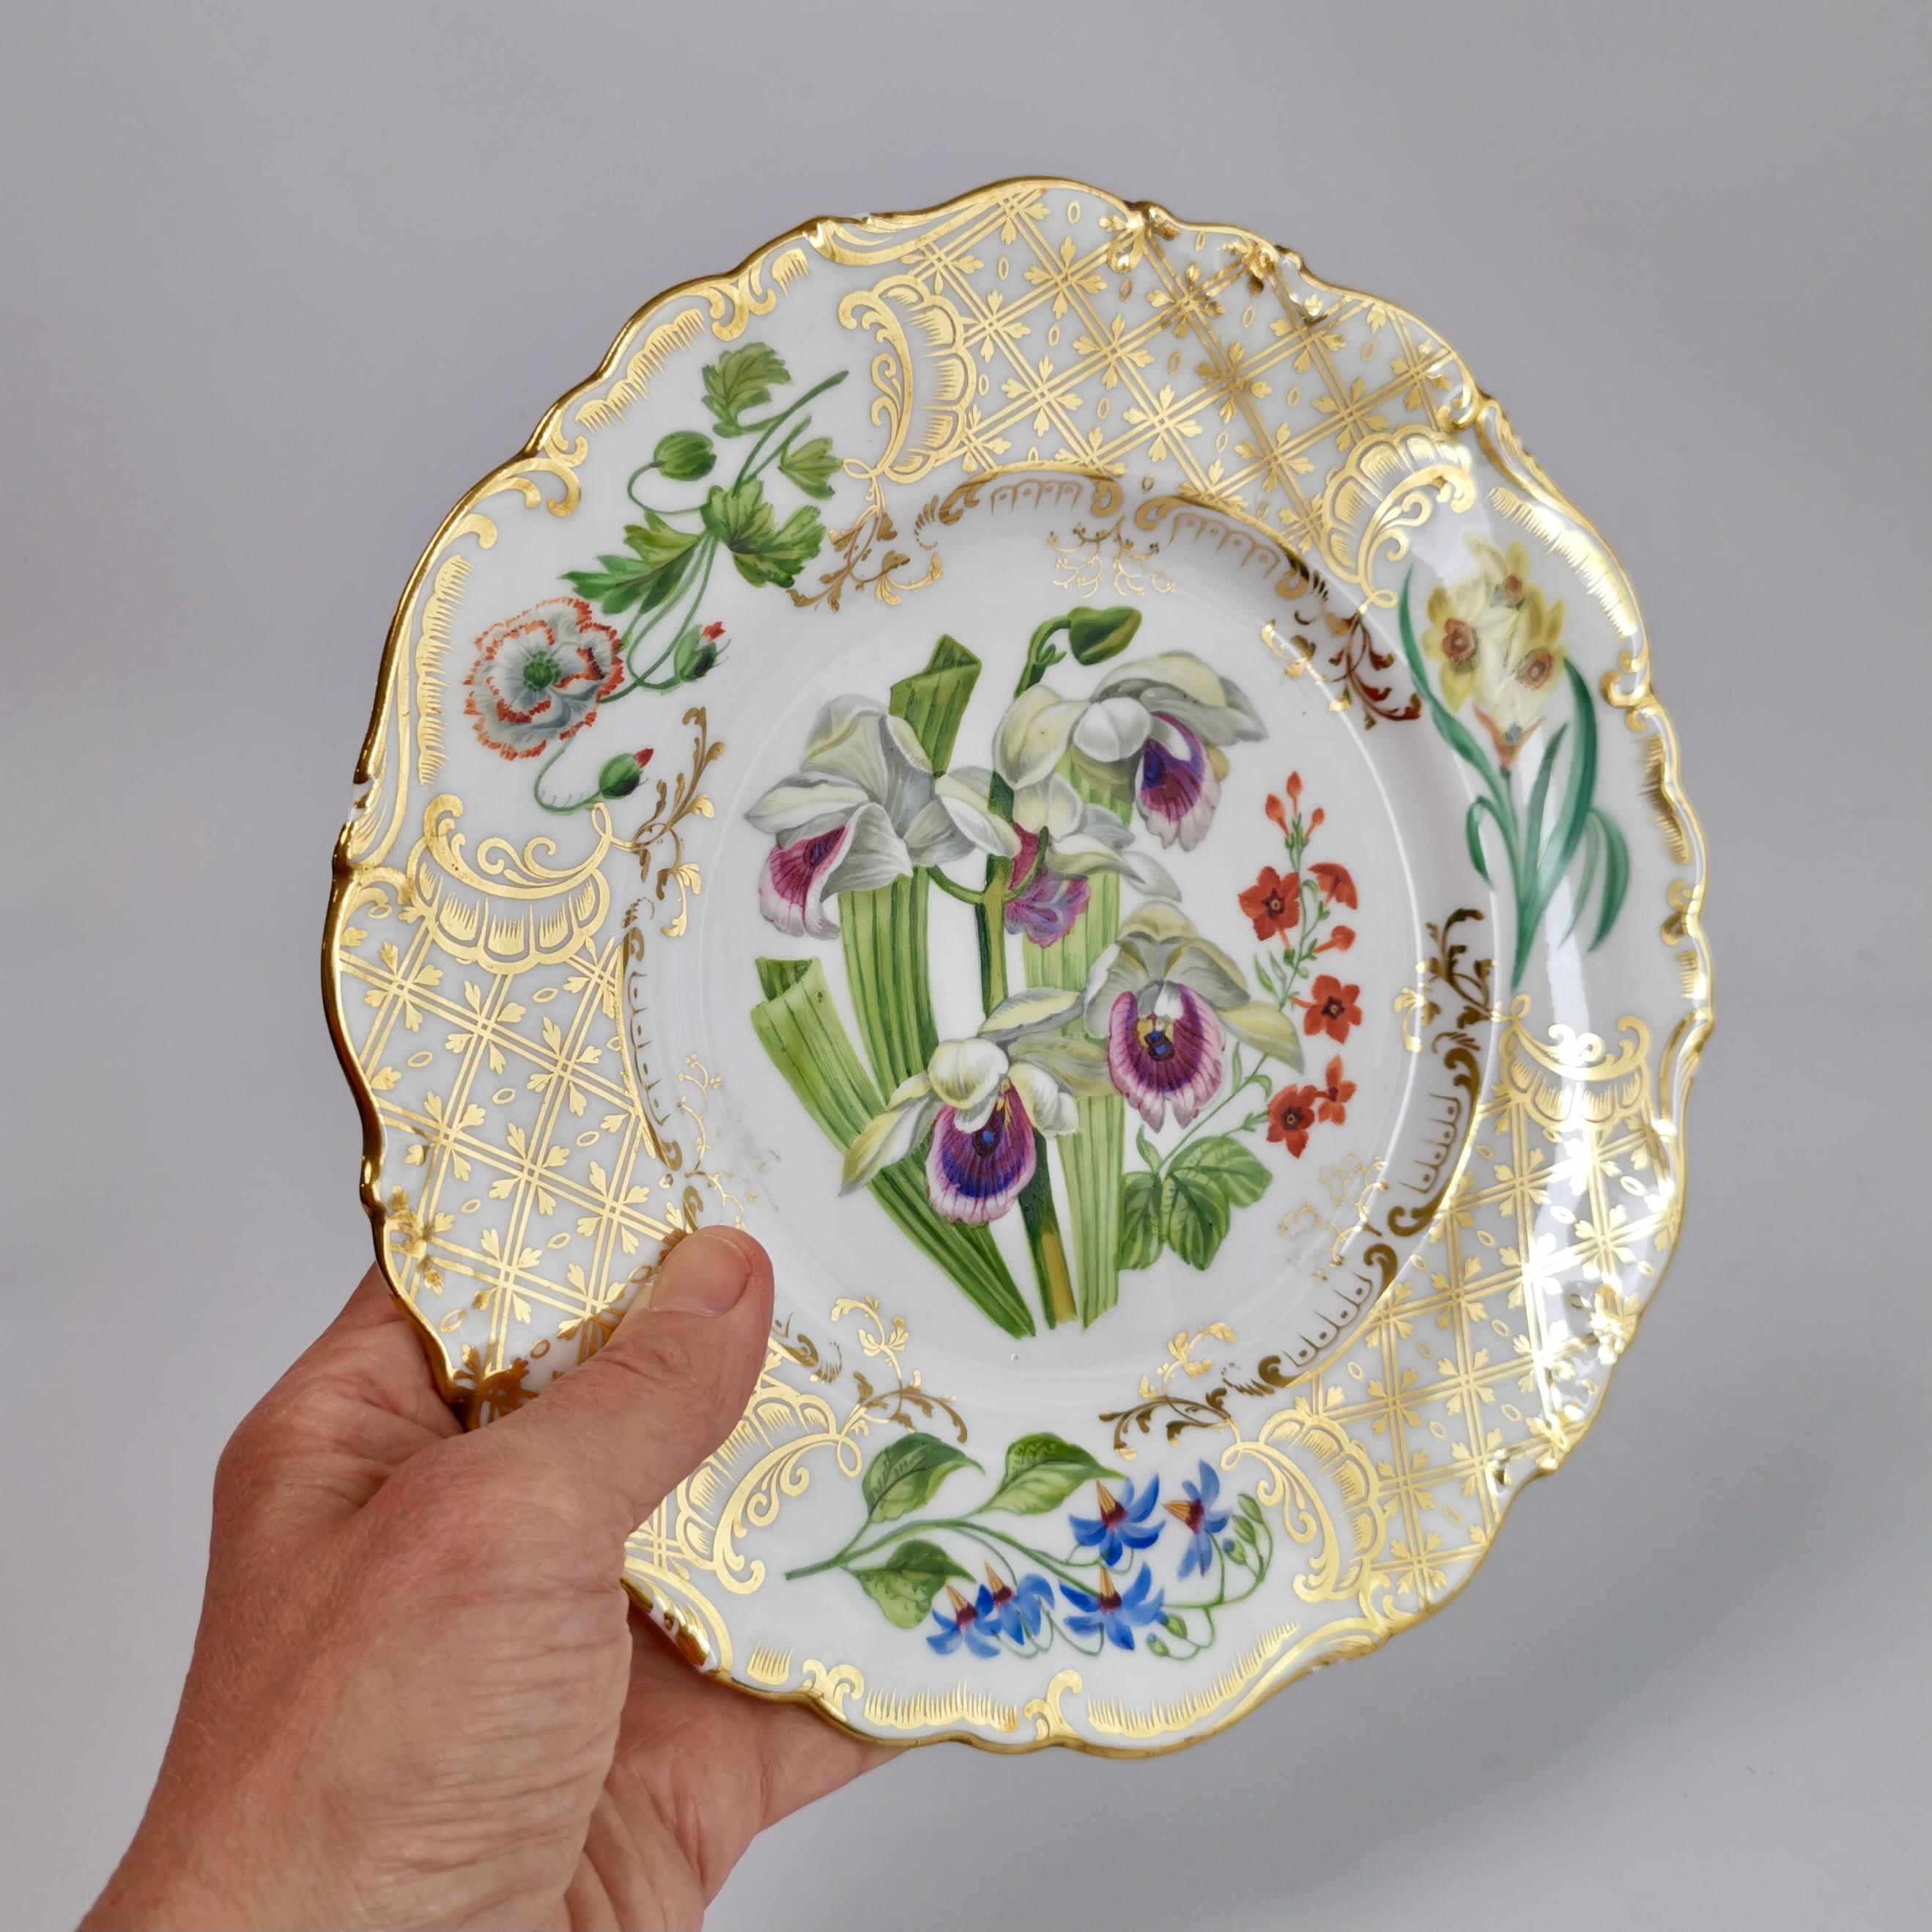 This is a stunning dessert plate made by Ridgway some time between 1845 and 1850. It would have belonged to a large dessert service. The plate is beautifully shaped and has a rich decoration of lavish gilt and stunning hand painted flowers.

I